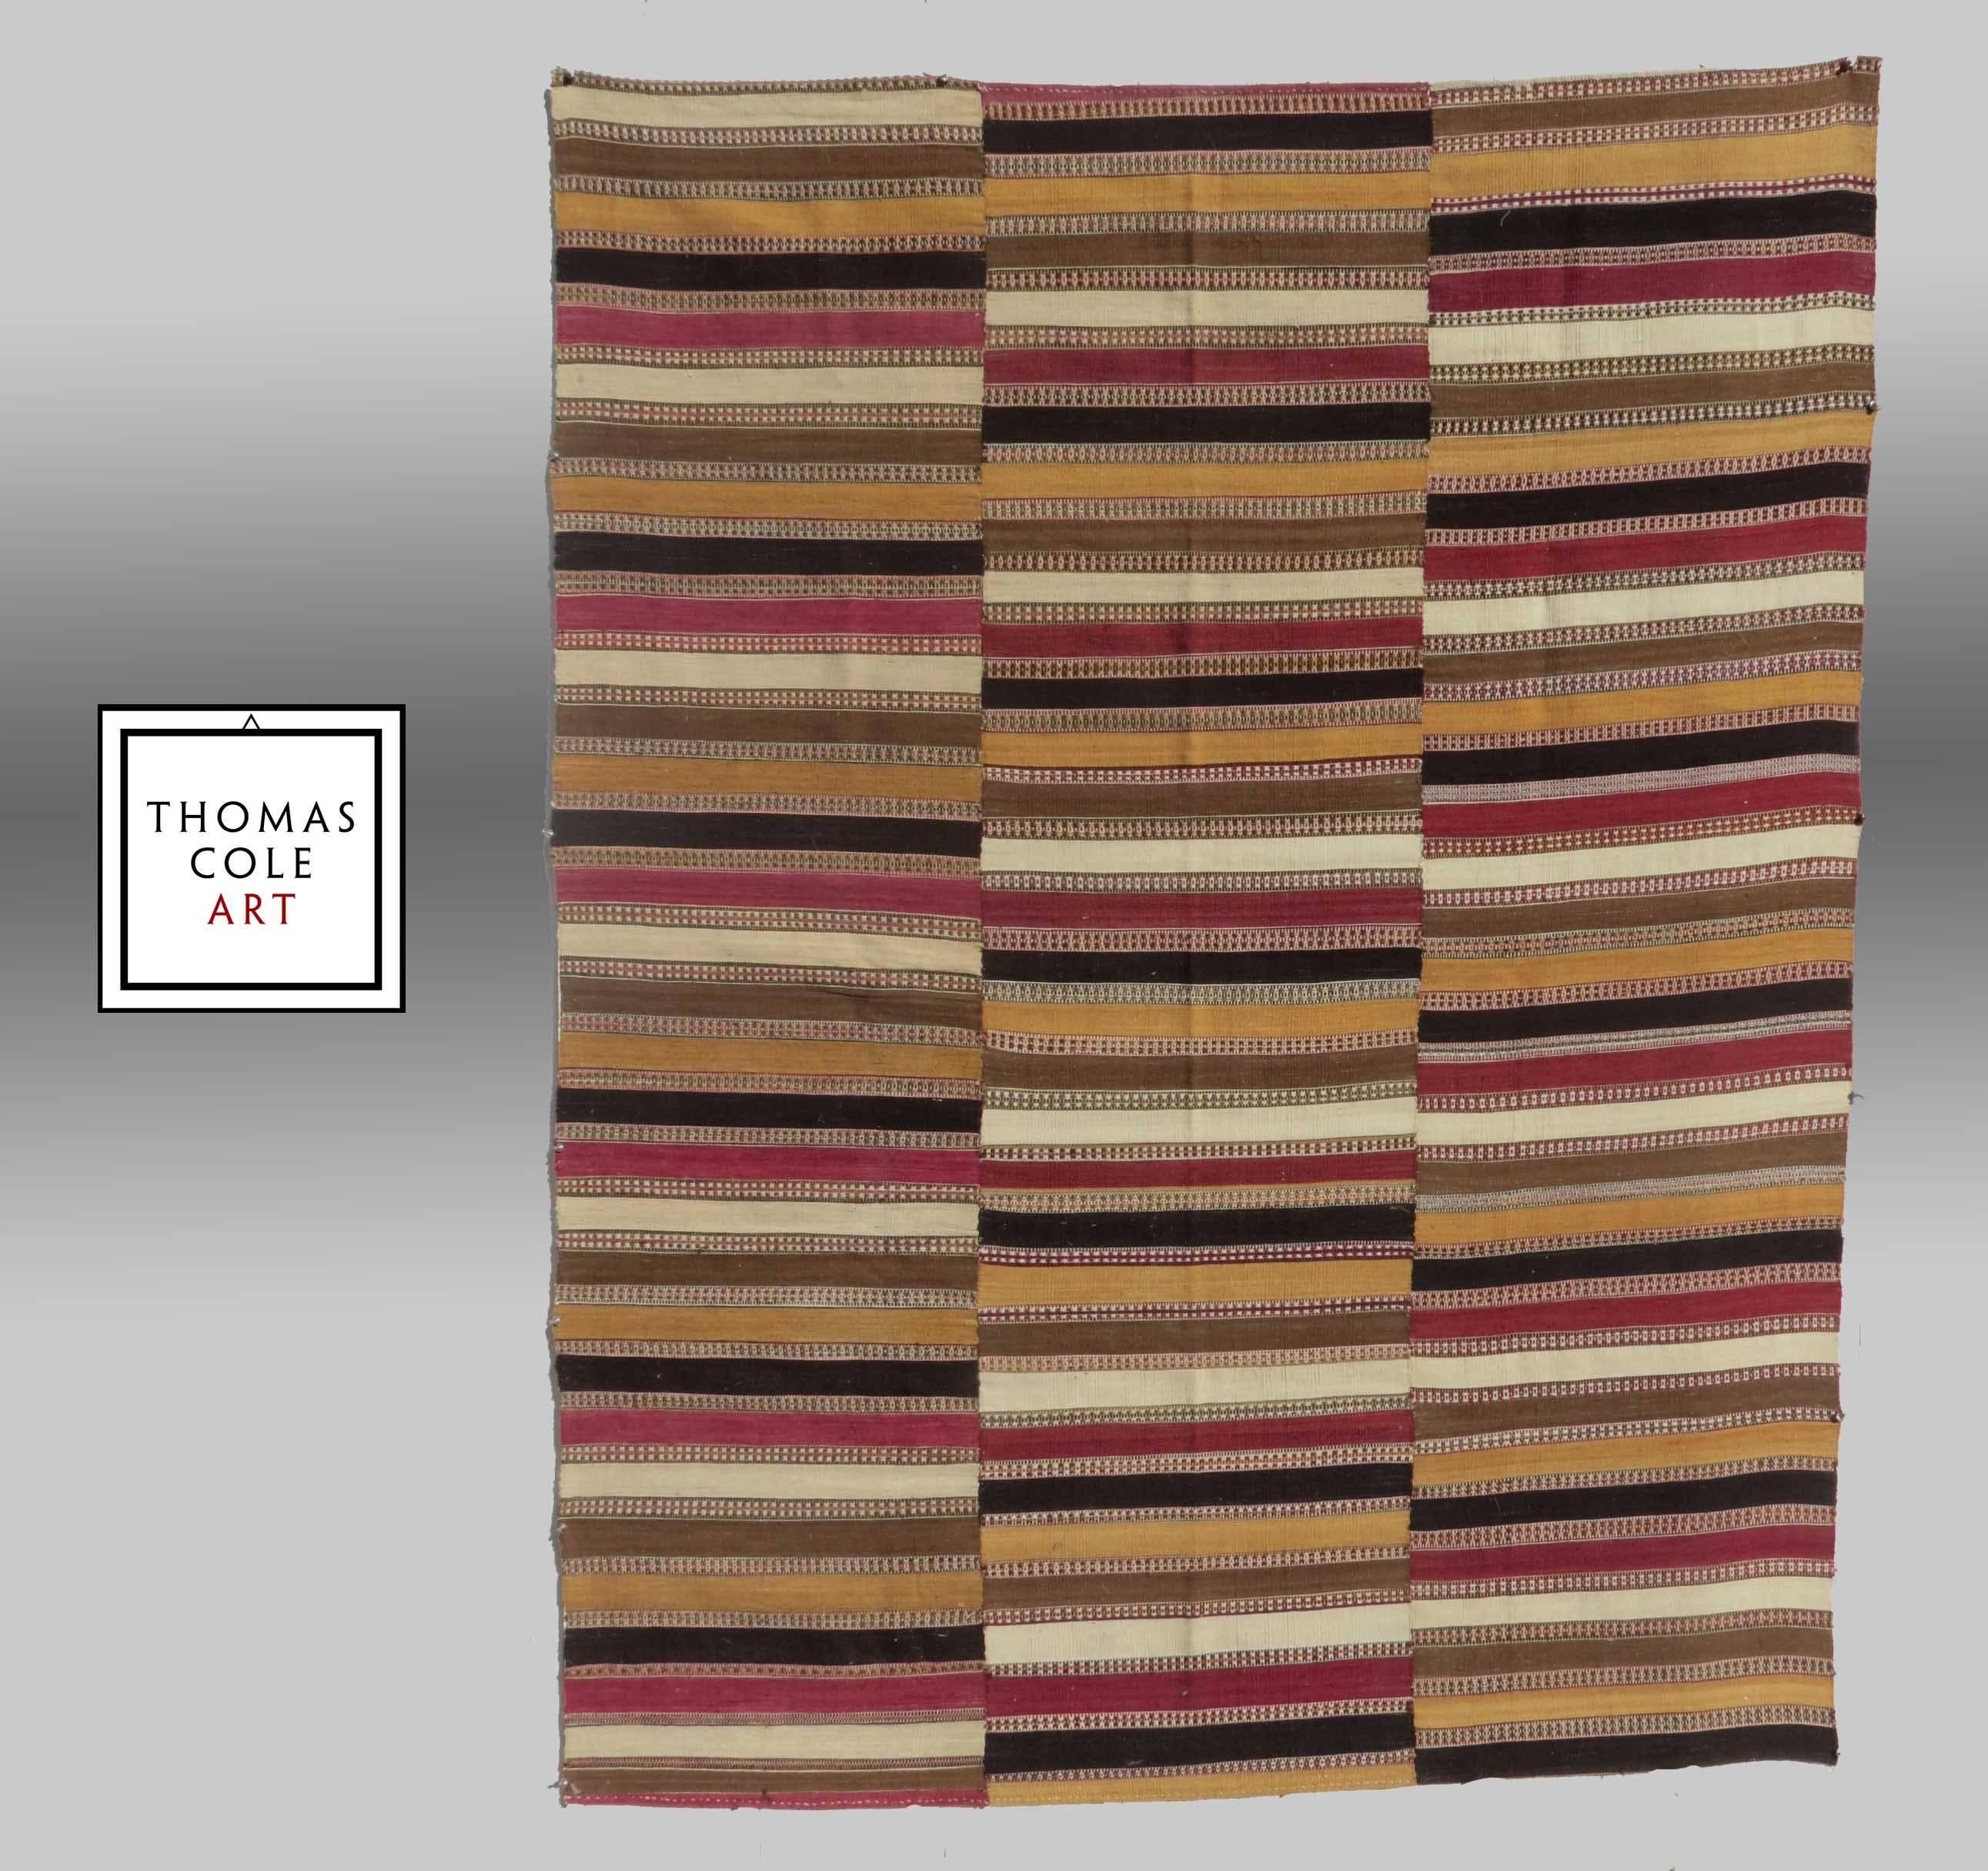 An extremly fine weave seems to be the distinctive characteristic of this visually engaging group of Kilims from northern Iran.

These were used as 